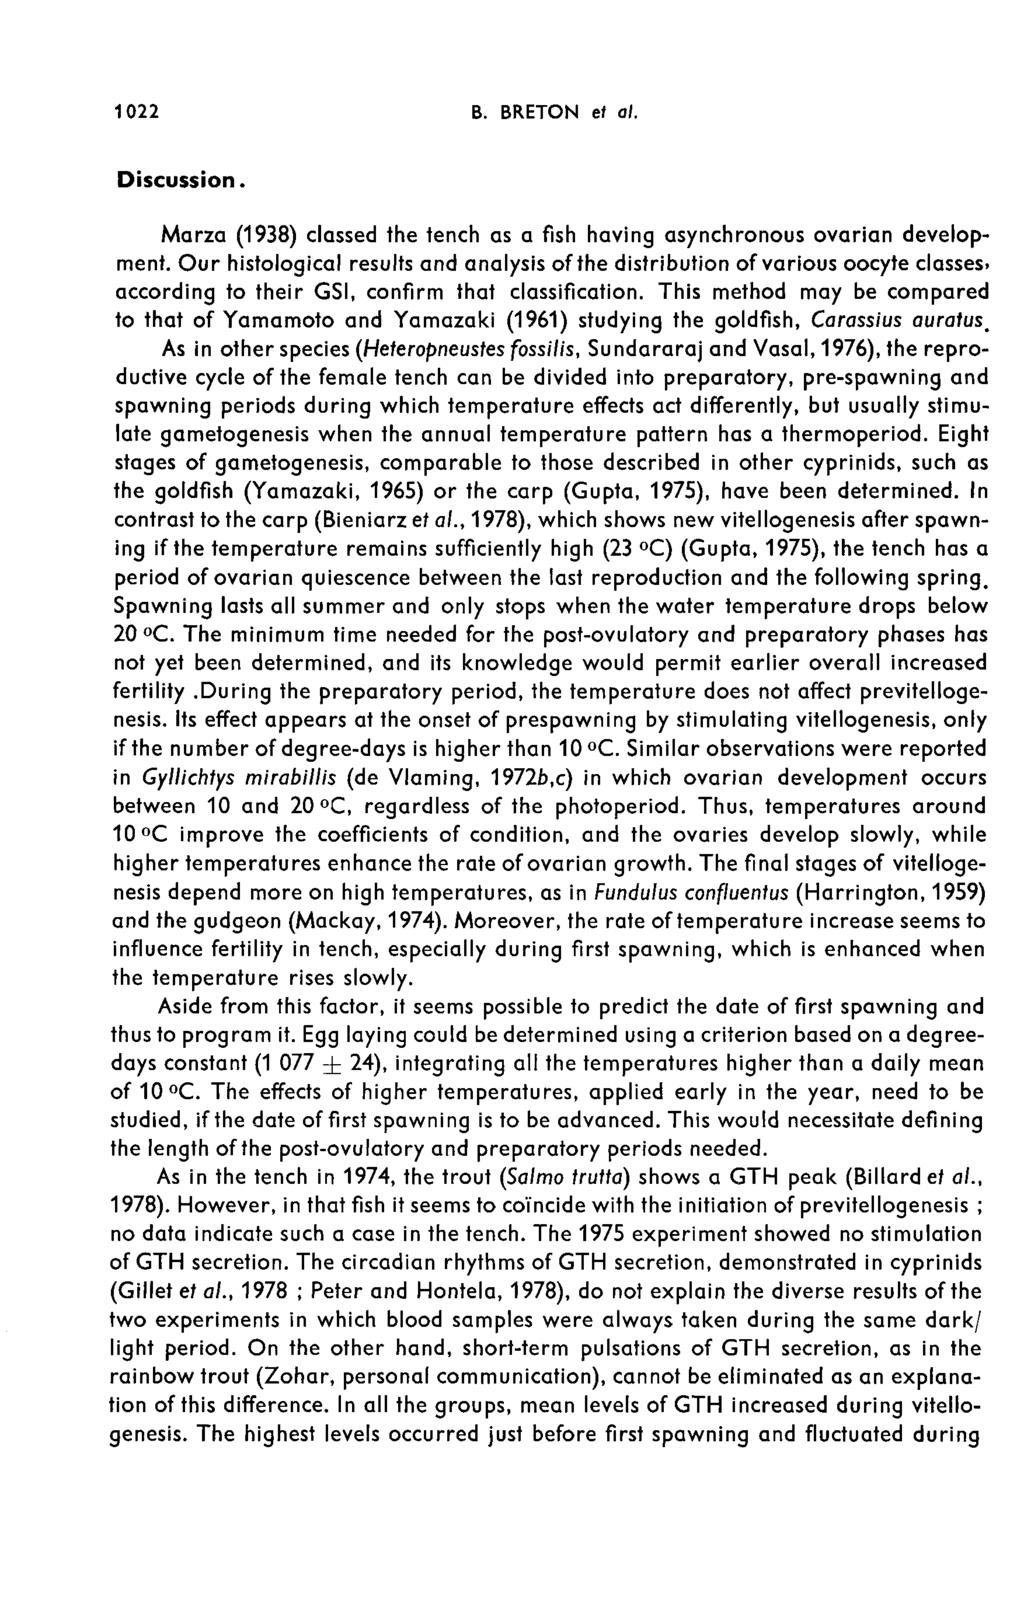 Discussion. Marza (1938) classed the tench as a fish having asynchronous ovarian development.